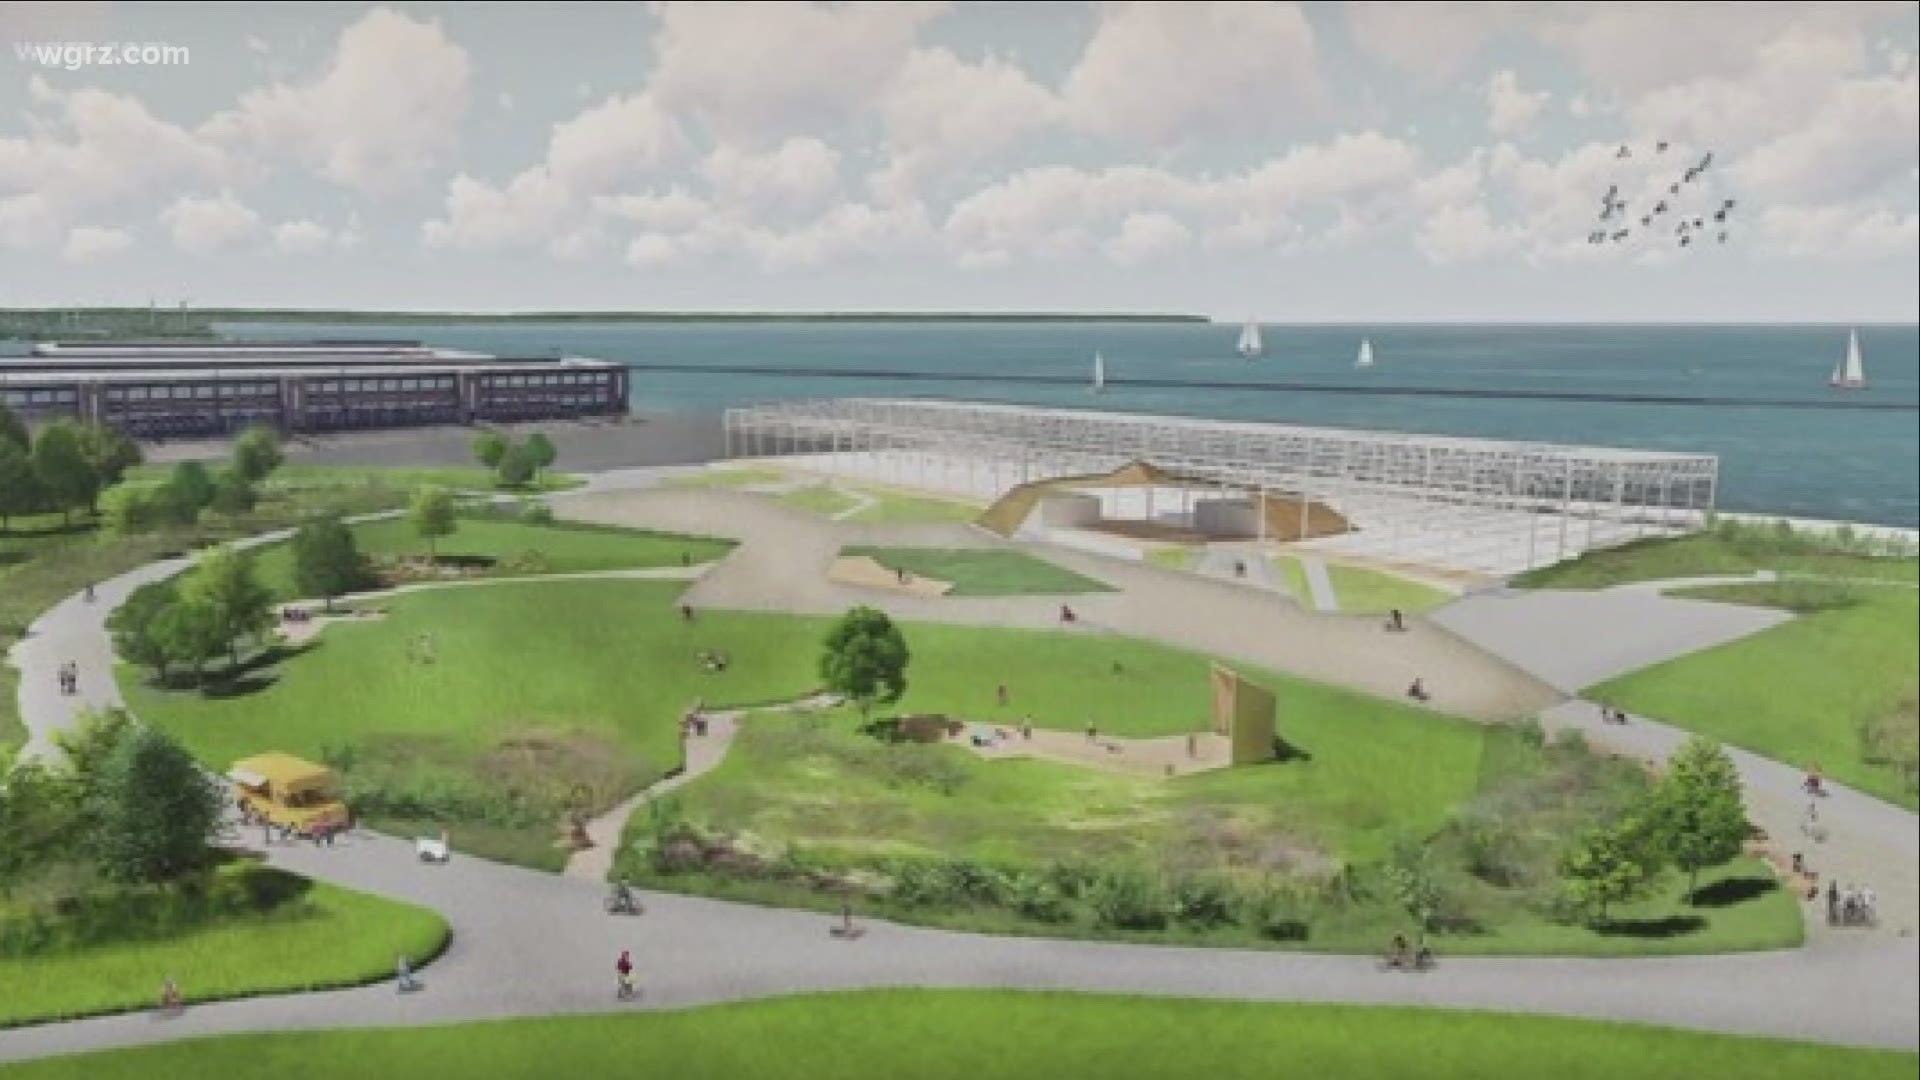 Plans to turn an old warehouse along the Outer Harbor into an entertainment destination are on pause, after a lawsuit was filed by four non-profits.